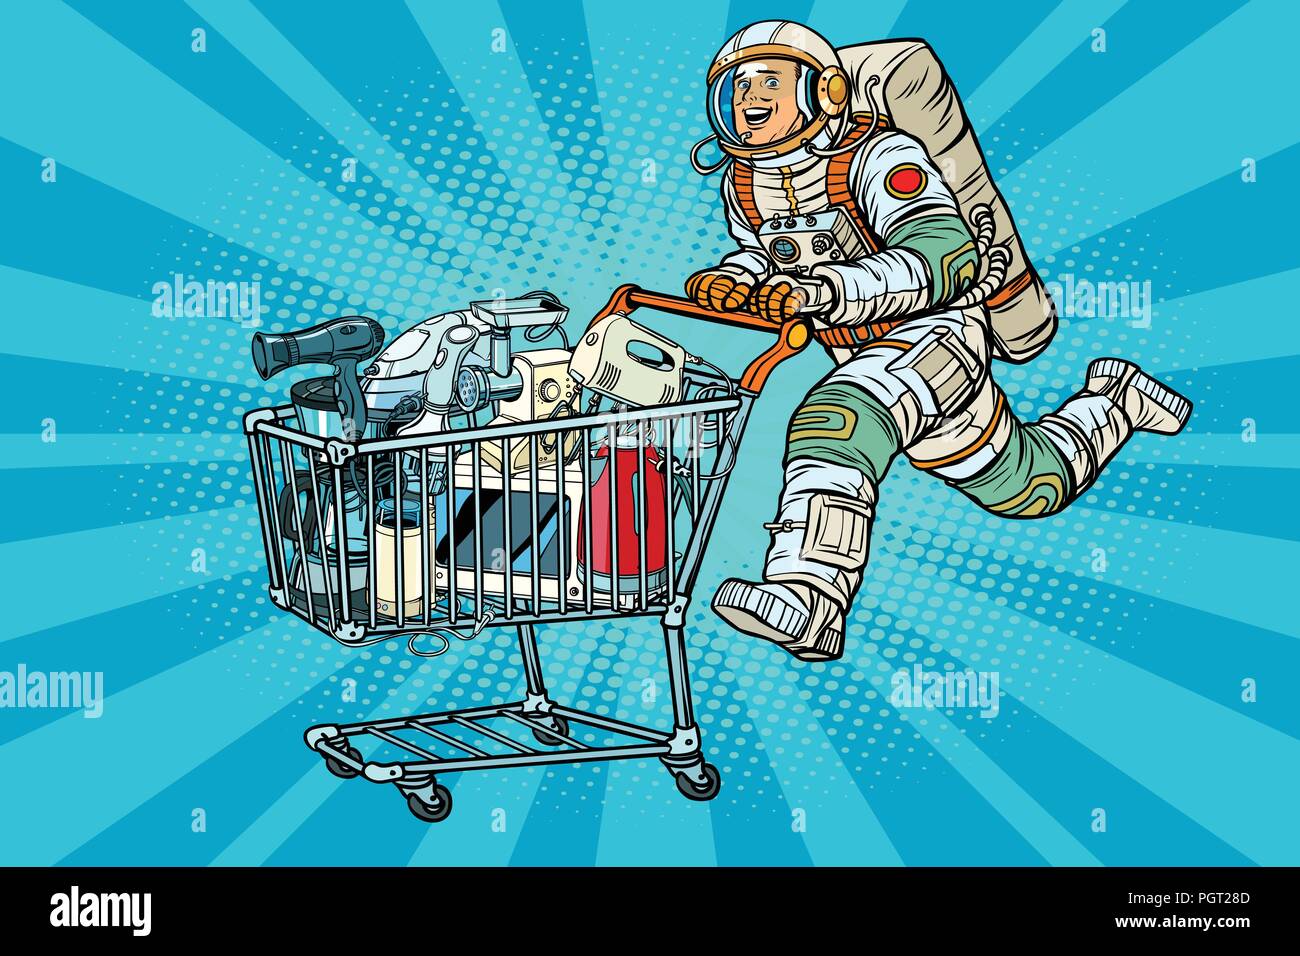 Astronaut on sale of home appliances Stock Vector